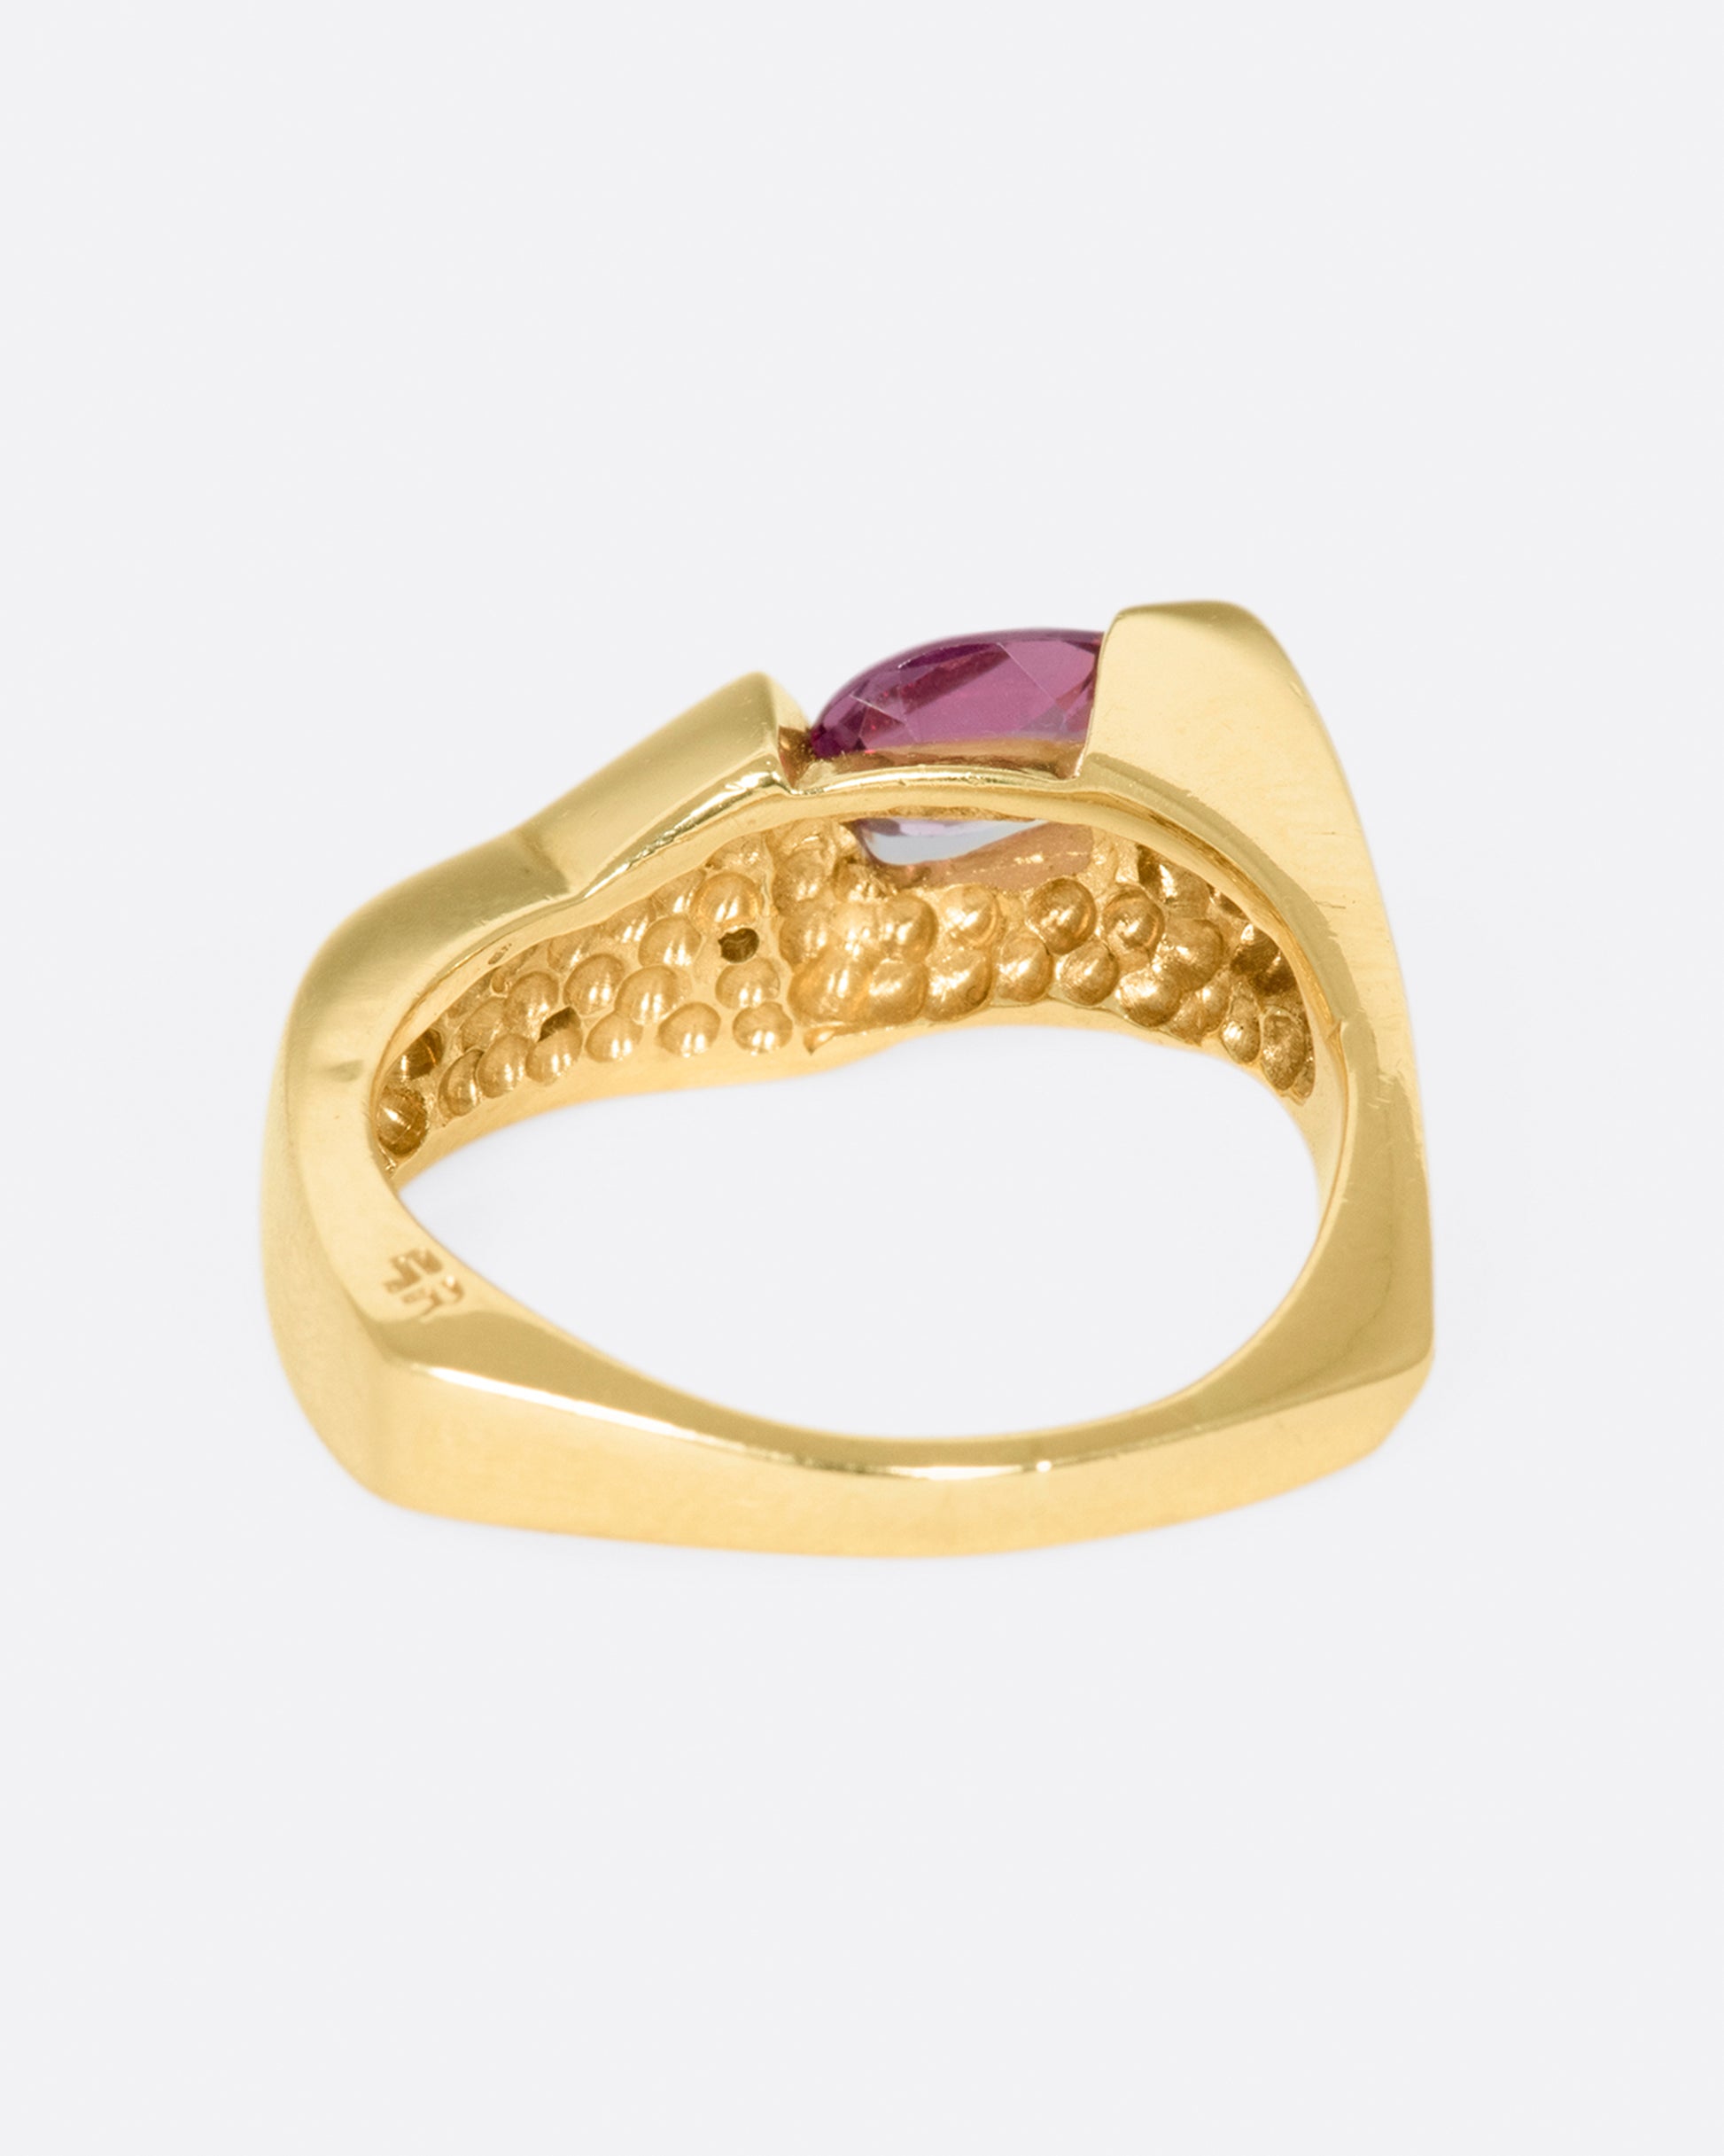 This ring looks different from every angle, is both substantial and comfortable, and stacks well with others.